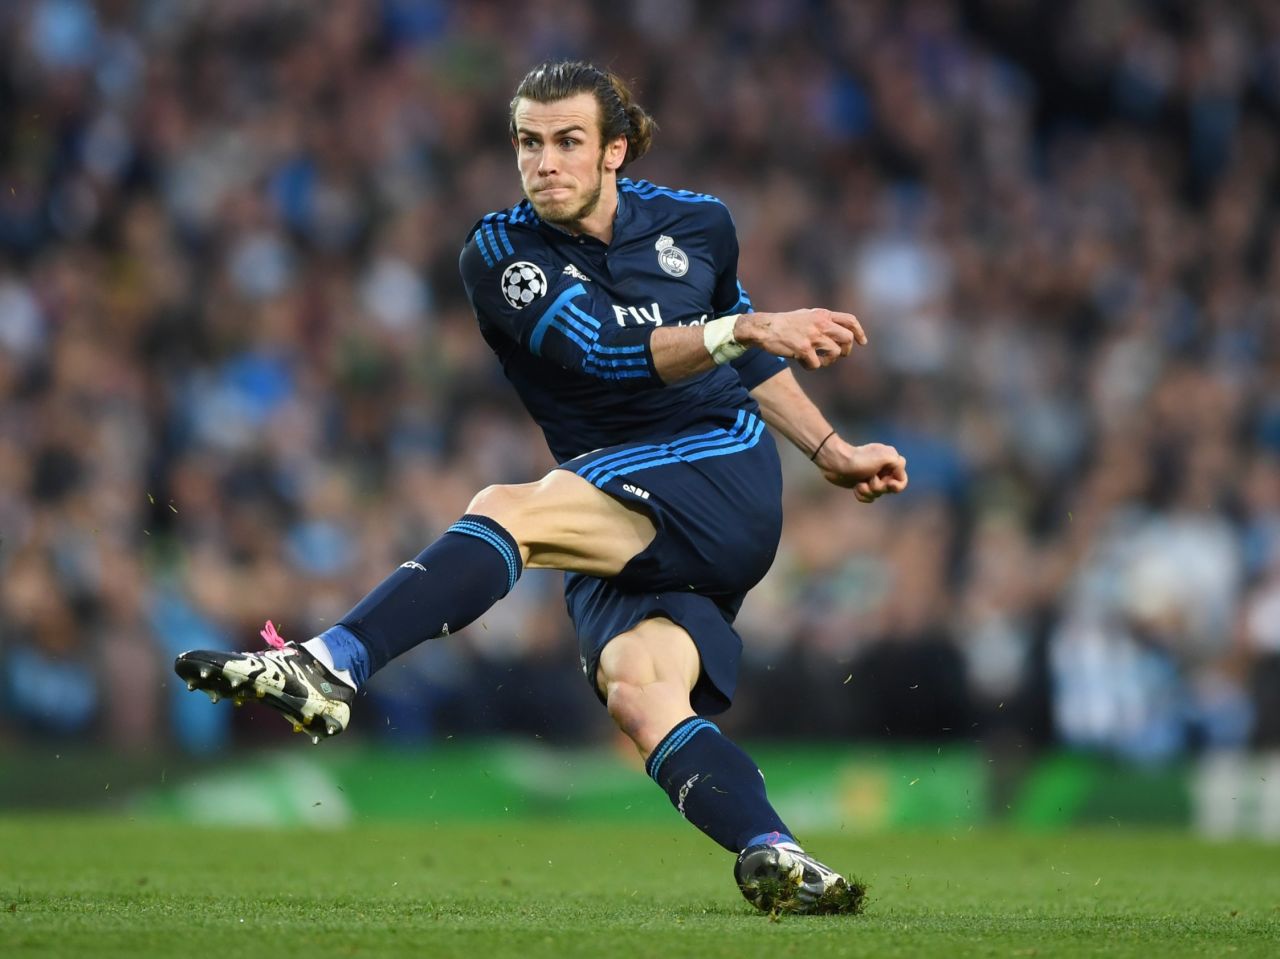 With Ronaldo and Benzema both off the field, Real was relying on Gareth Bale for inspiration. The Wales international threatened sporadically but failed to find a way through City's defense.